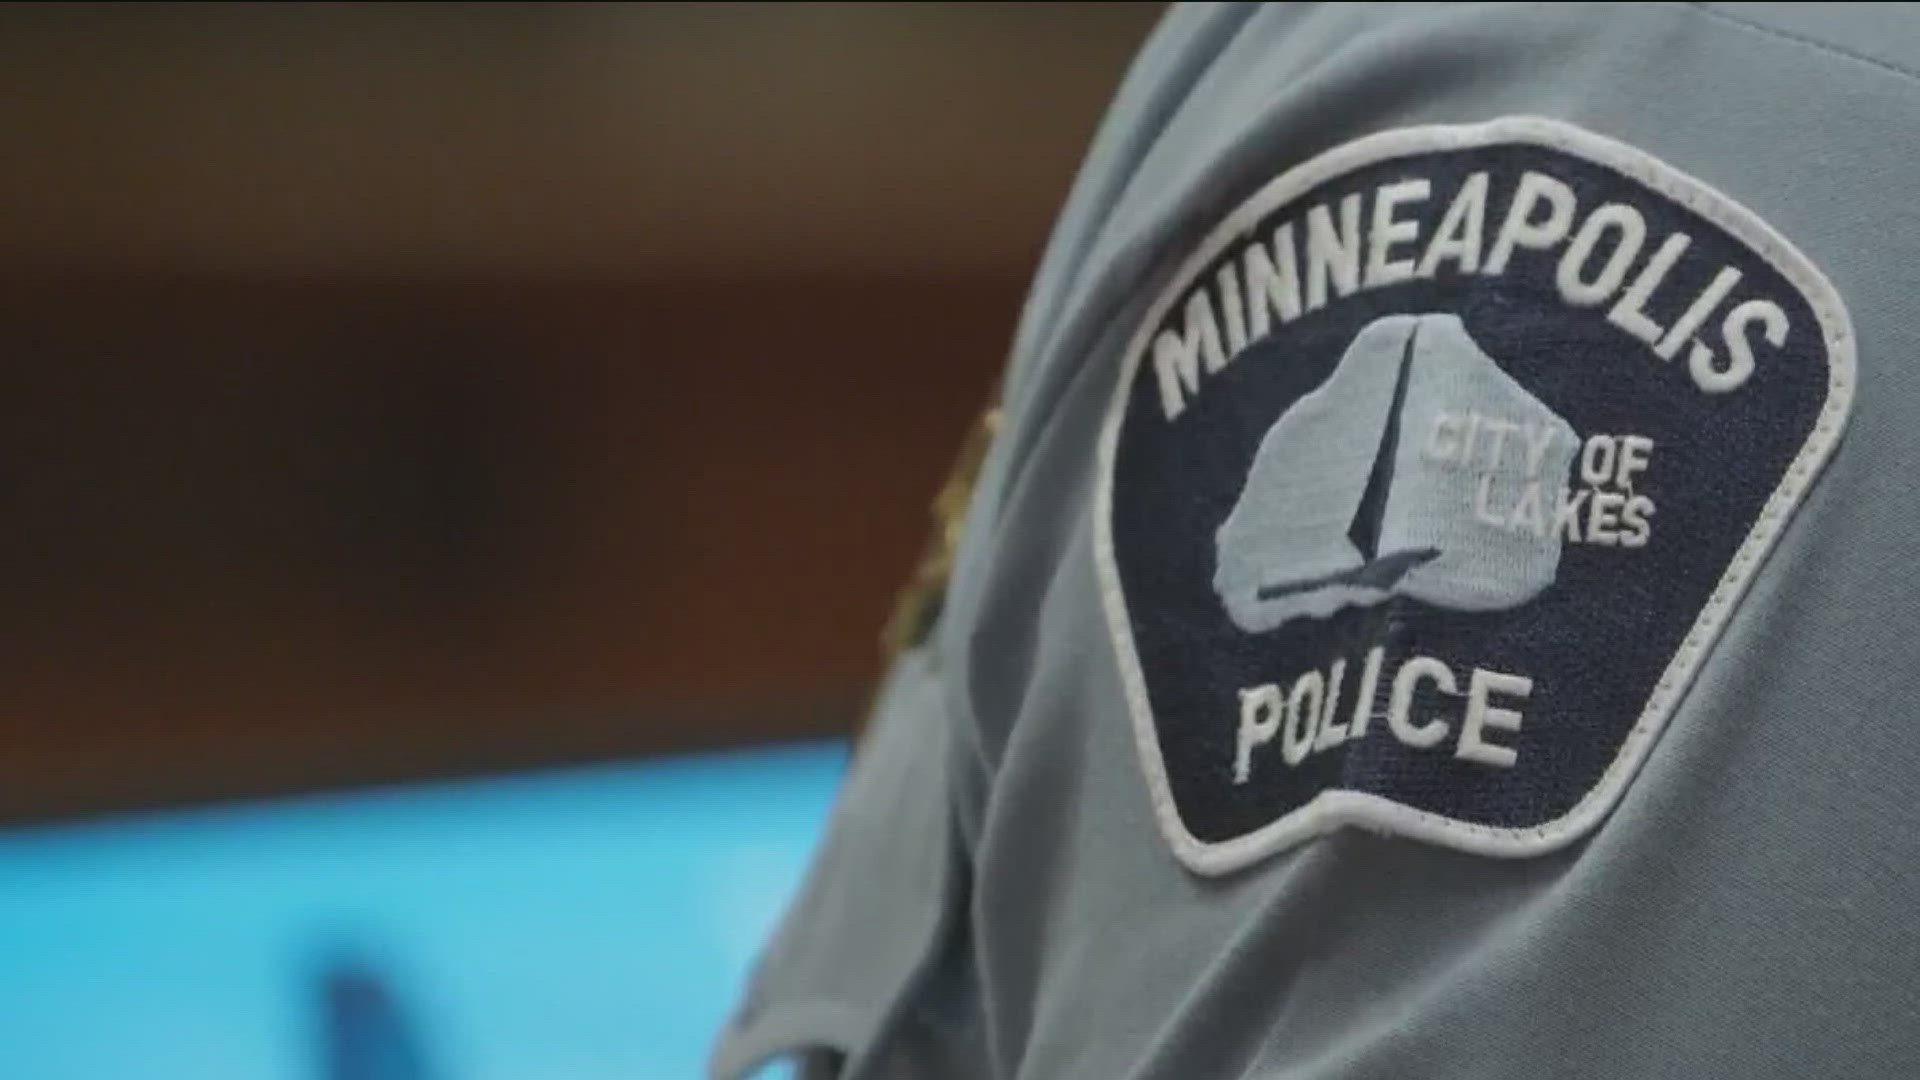 Few details of the deal are being shared before members of the Police Officers Federation of Minneapolis vote on it.